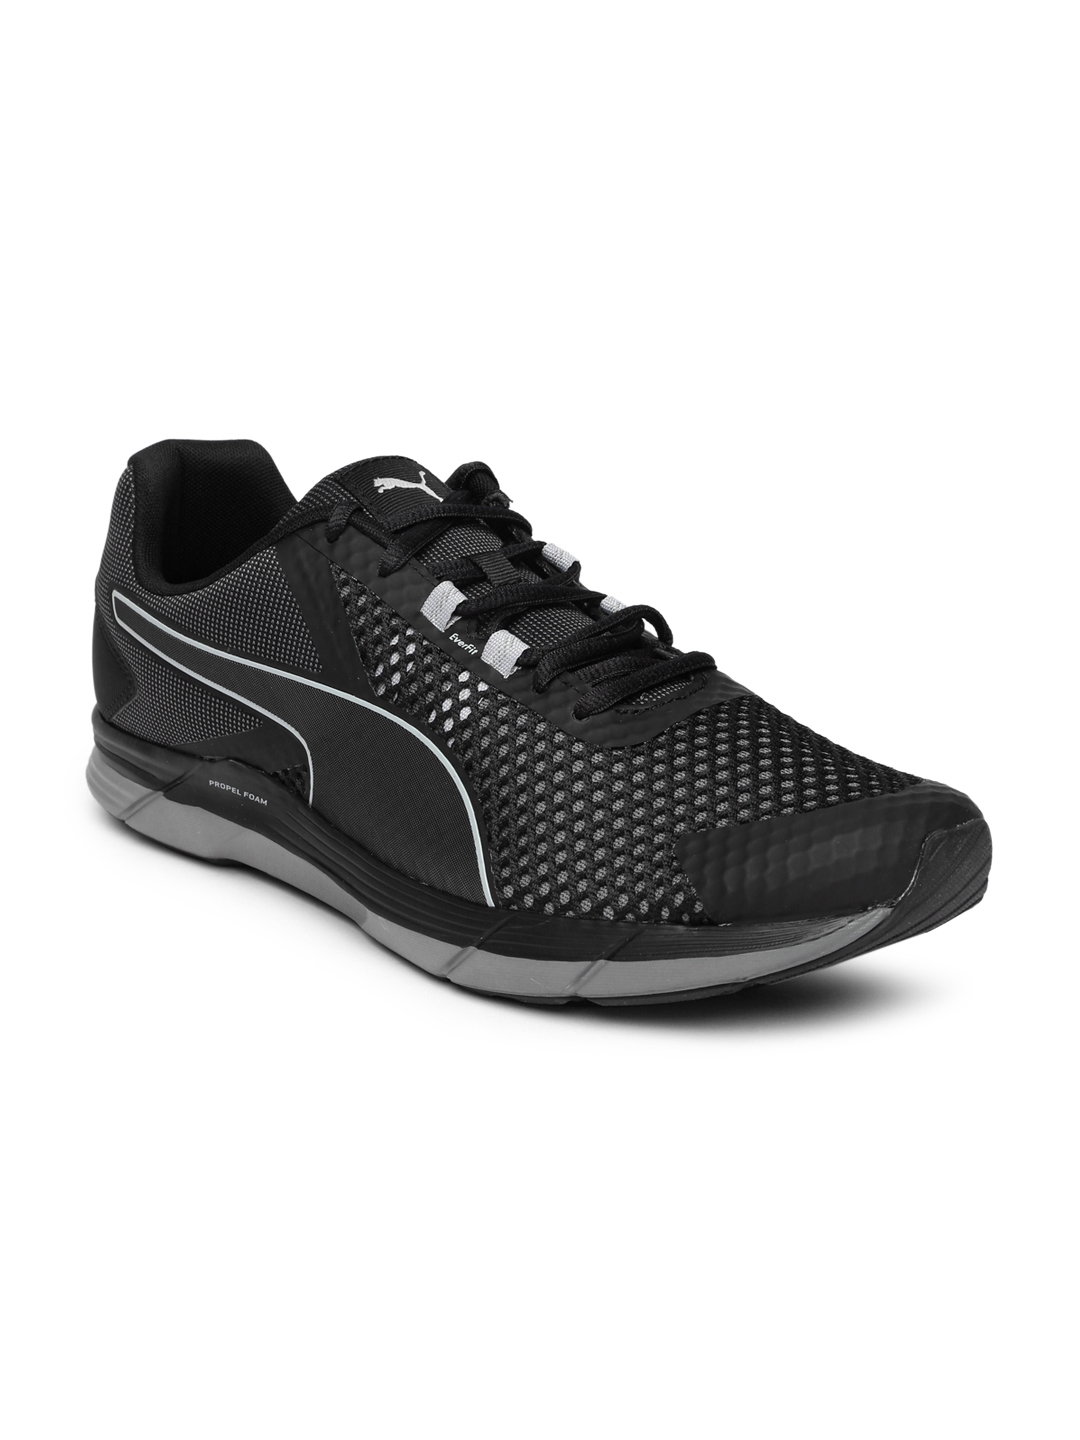 47 Sports Buy shoes online myntra for Mens